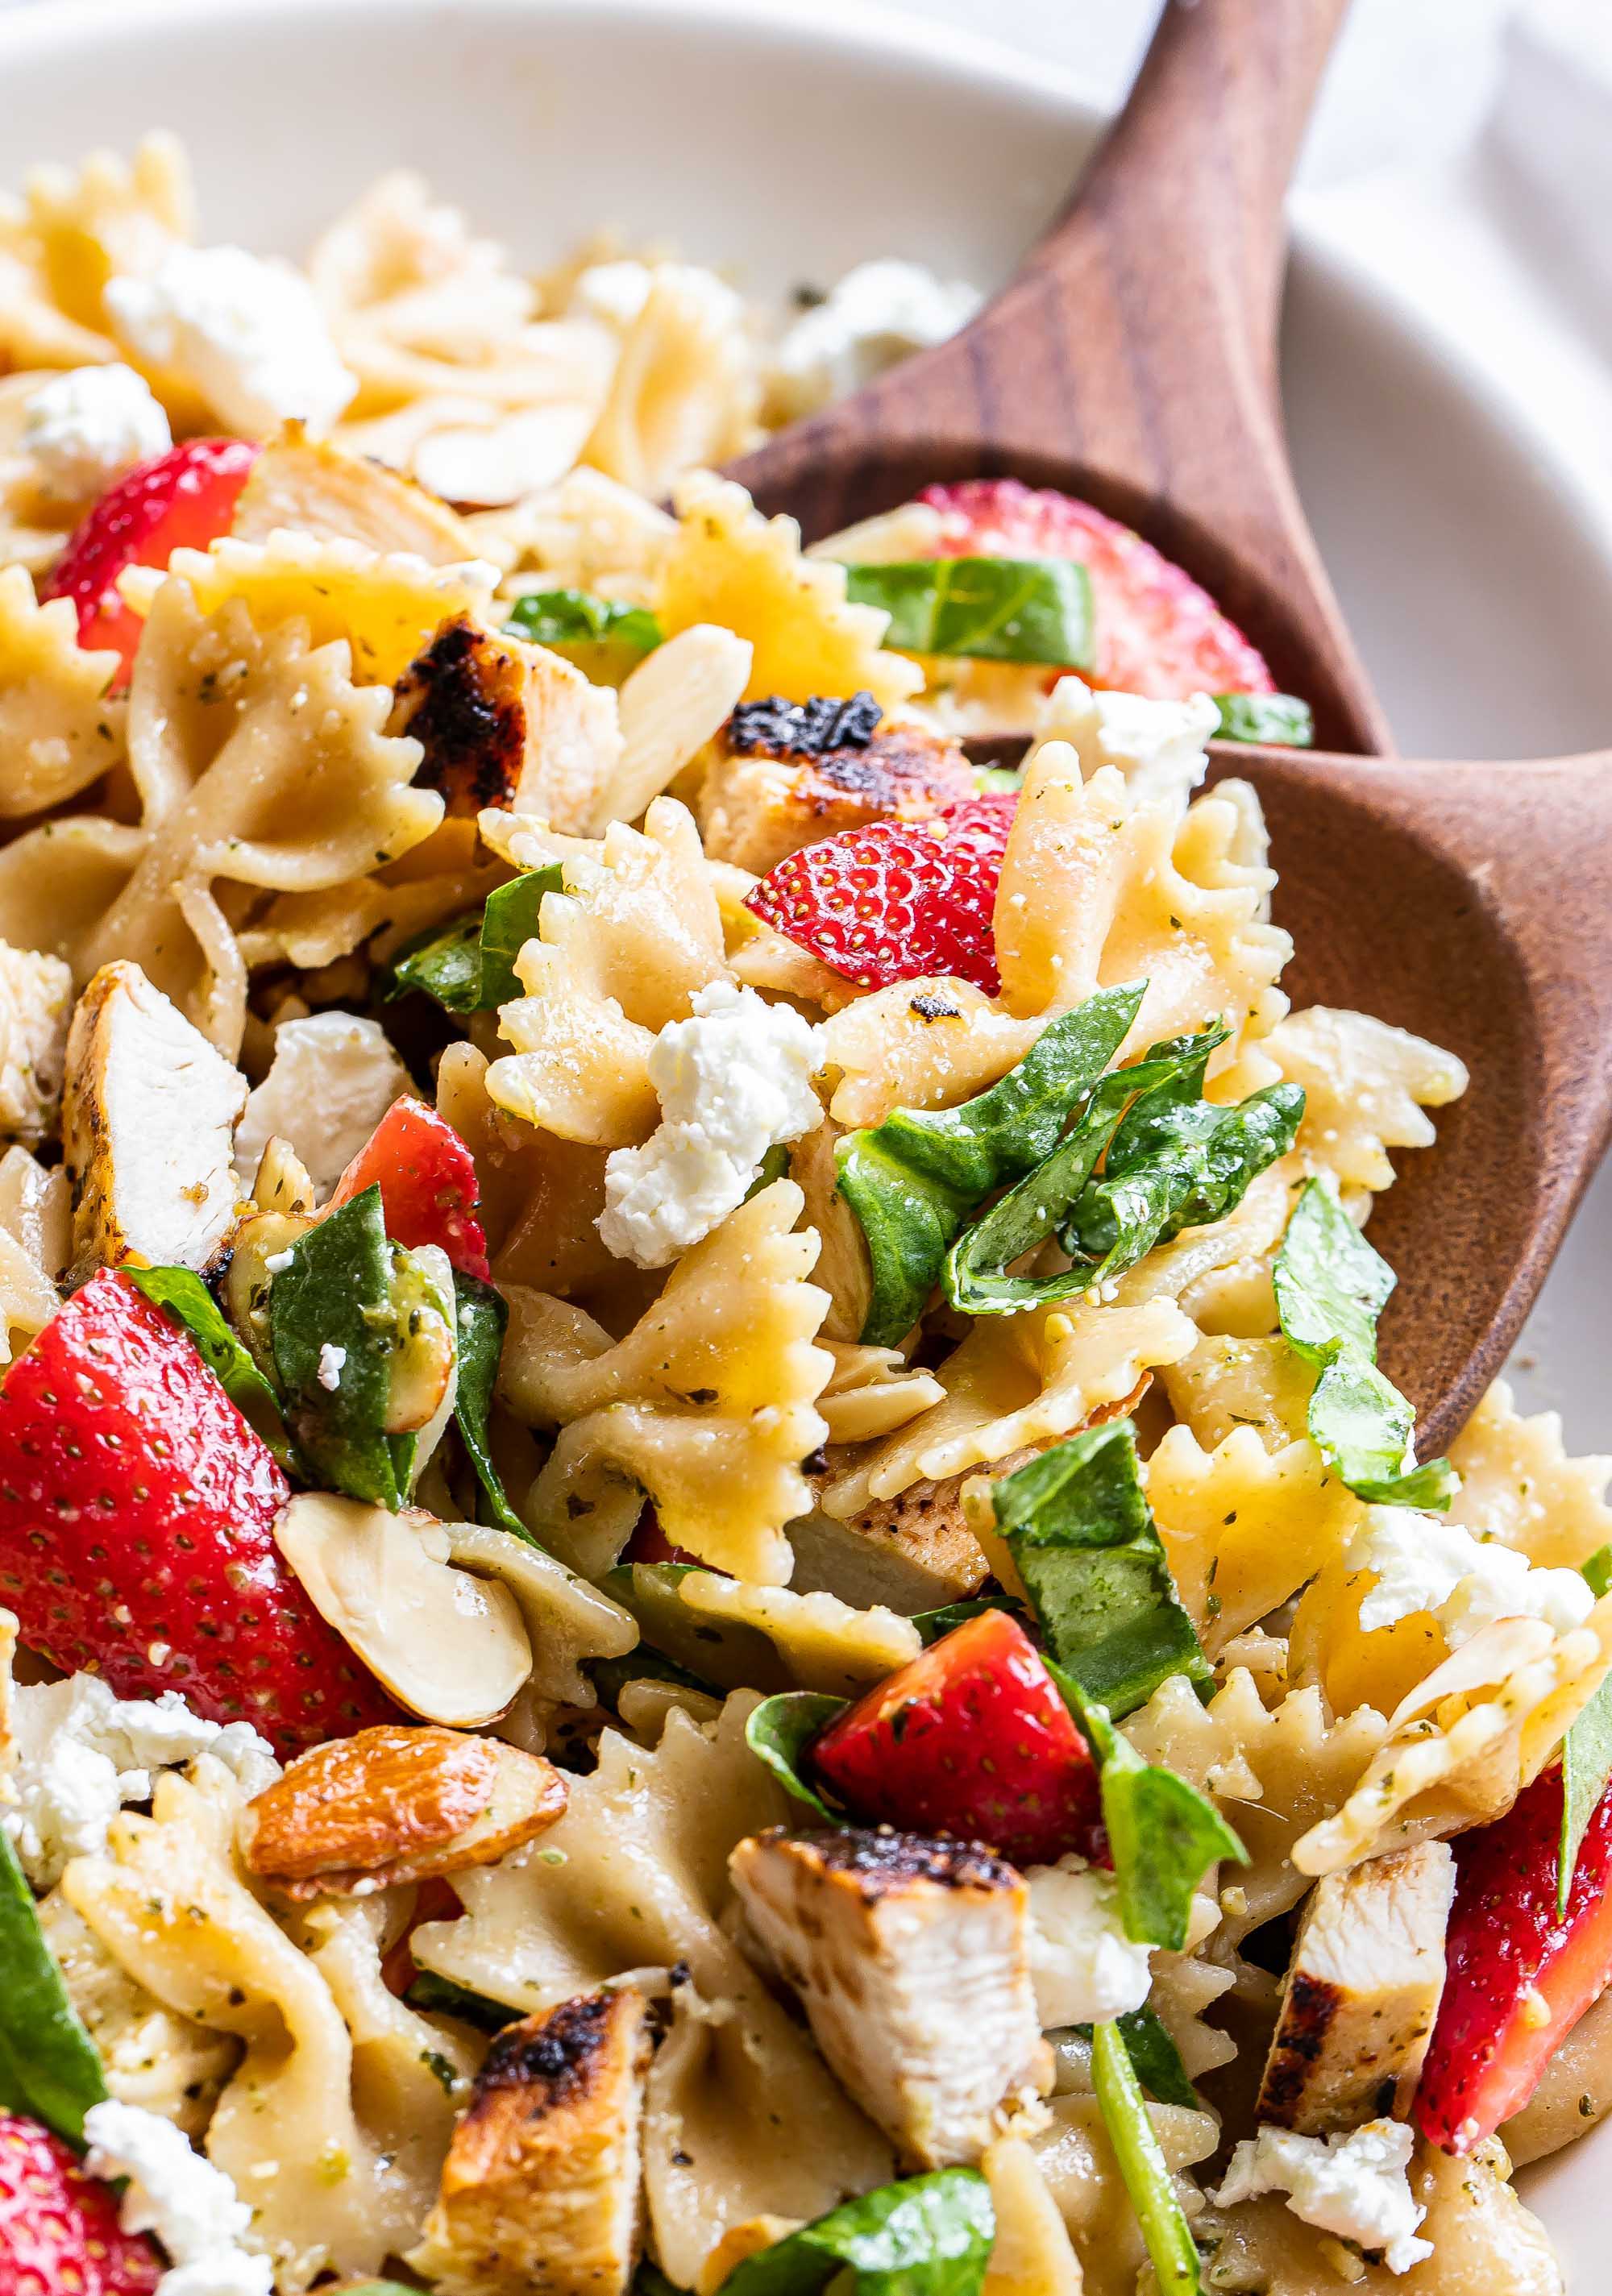 Farfalle pasta with grilled chicken, strawberries, spinach and more